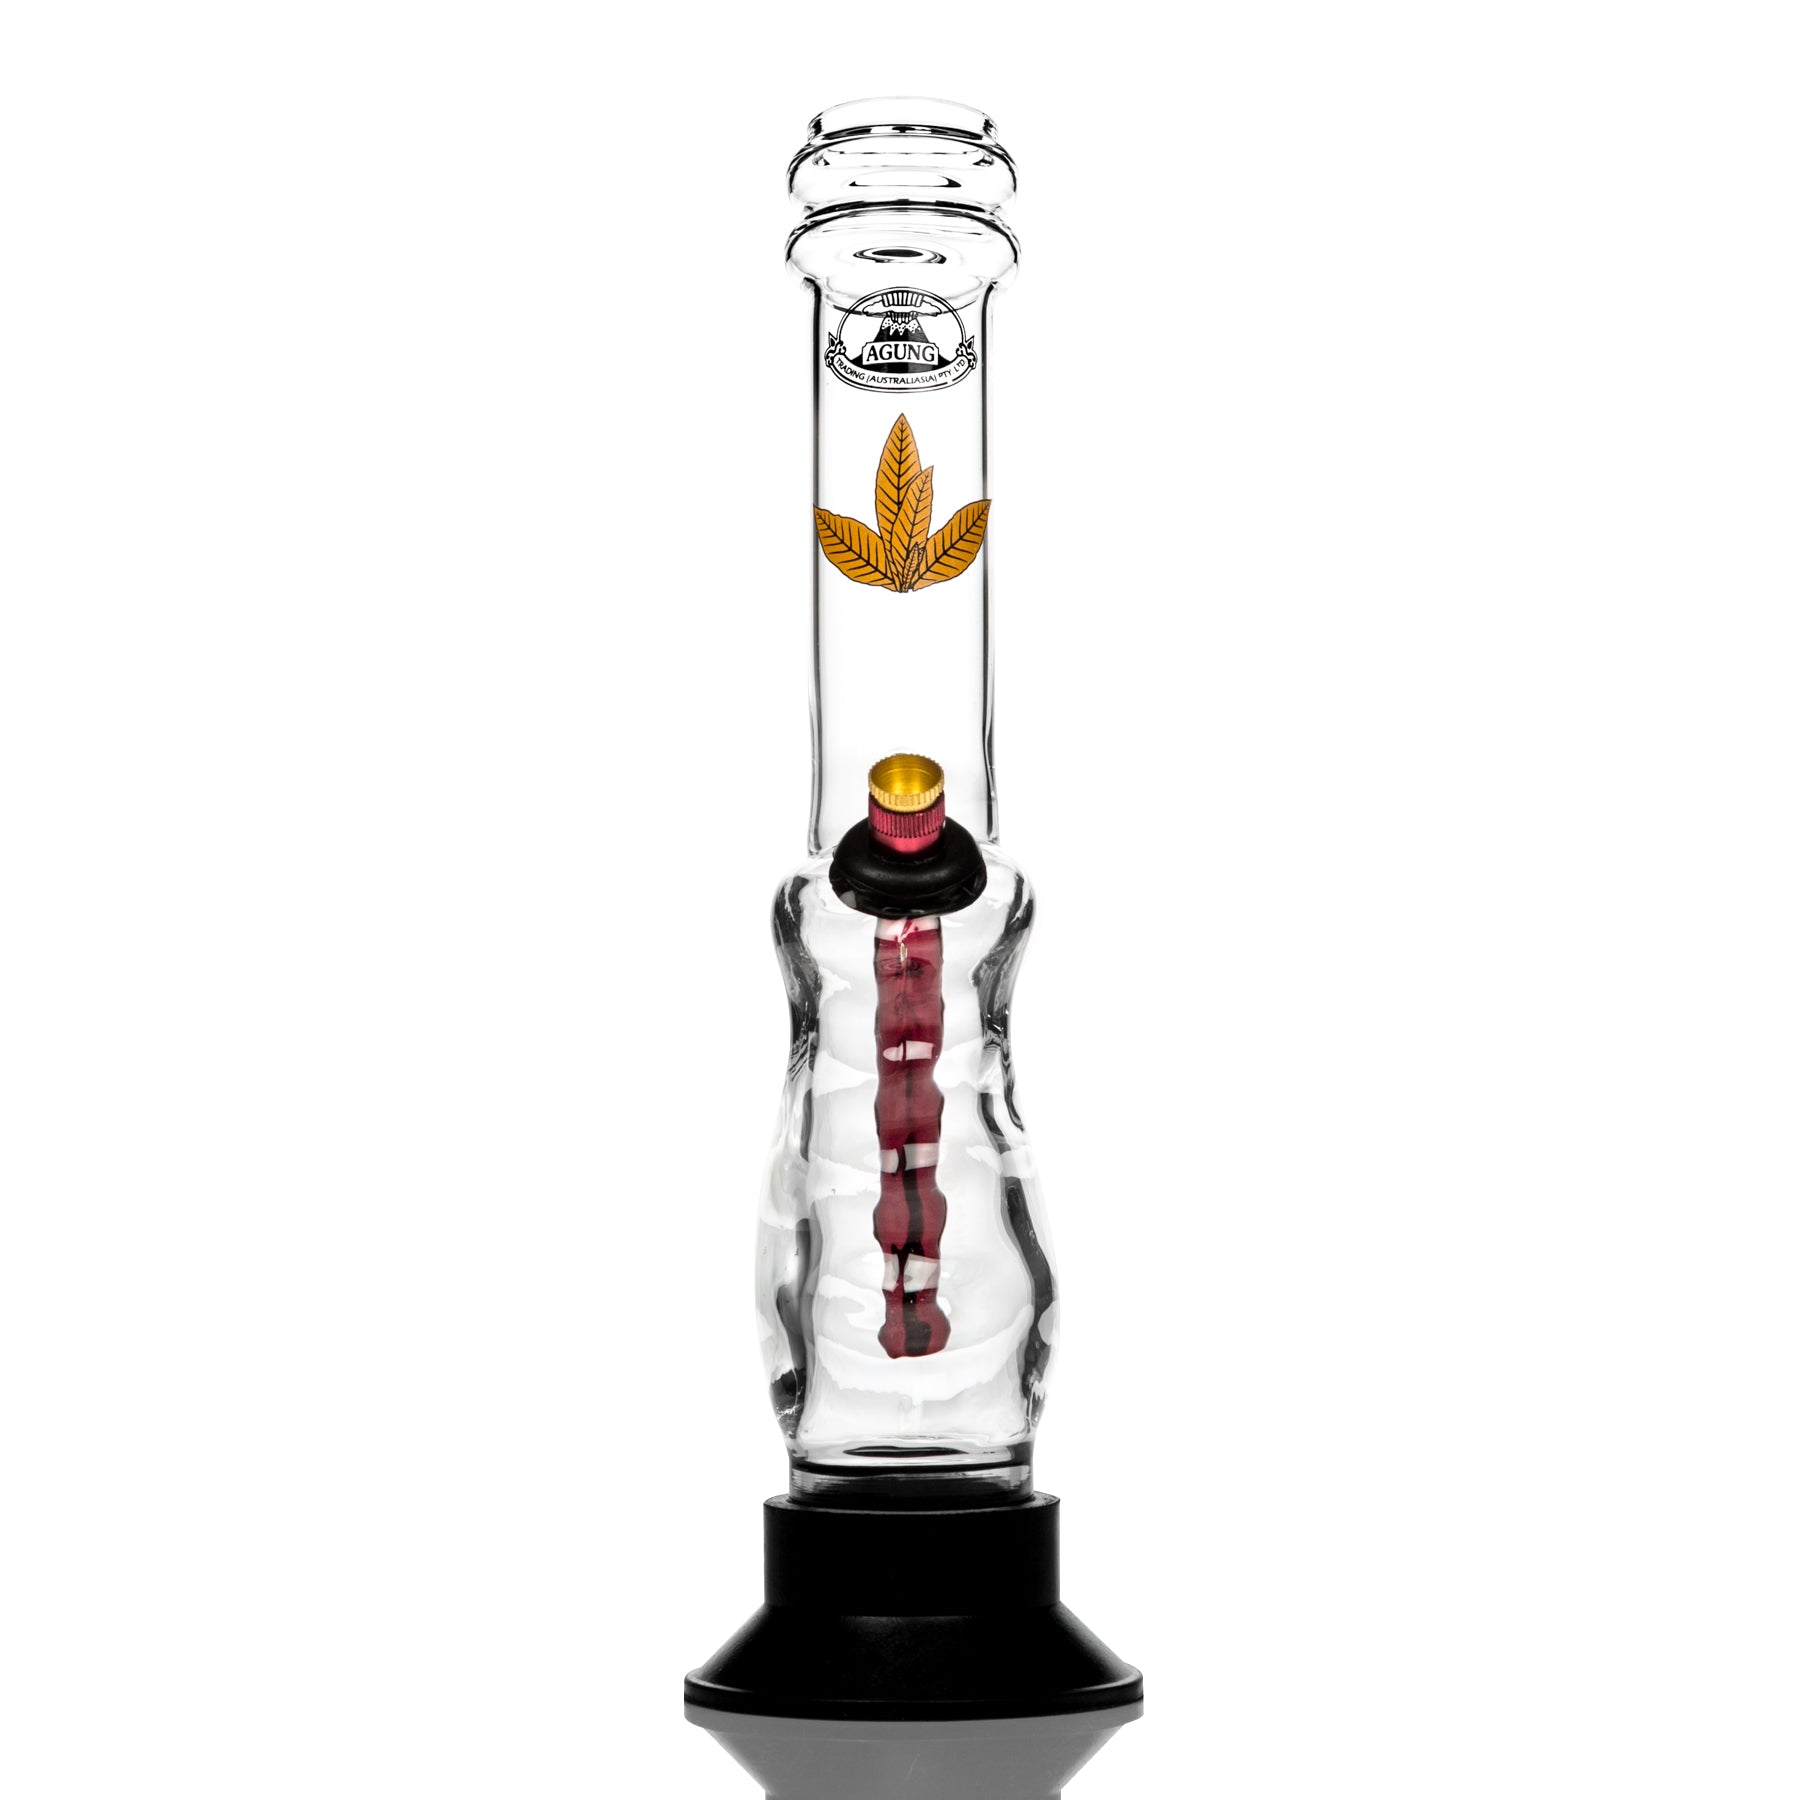 Agung gripper bong front on with metal stem and brass cone piece.